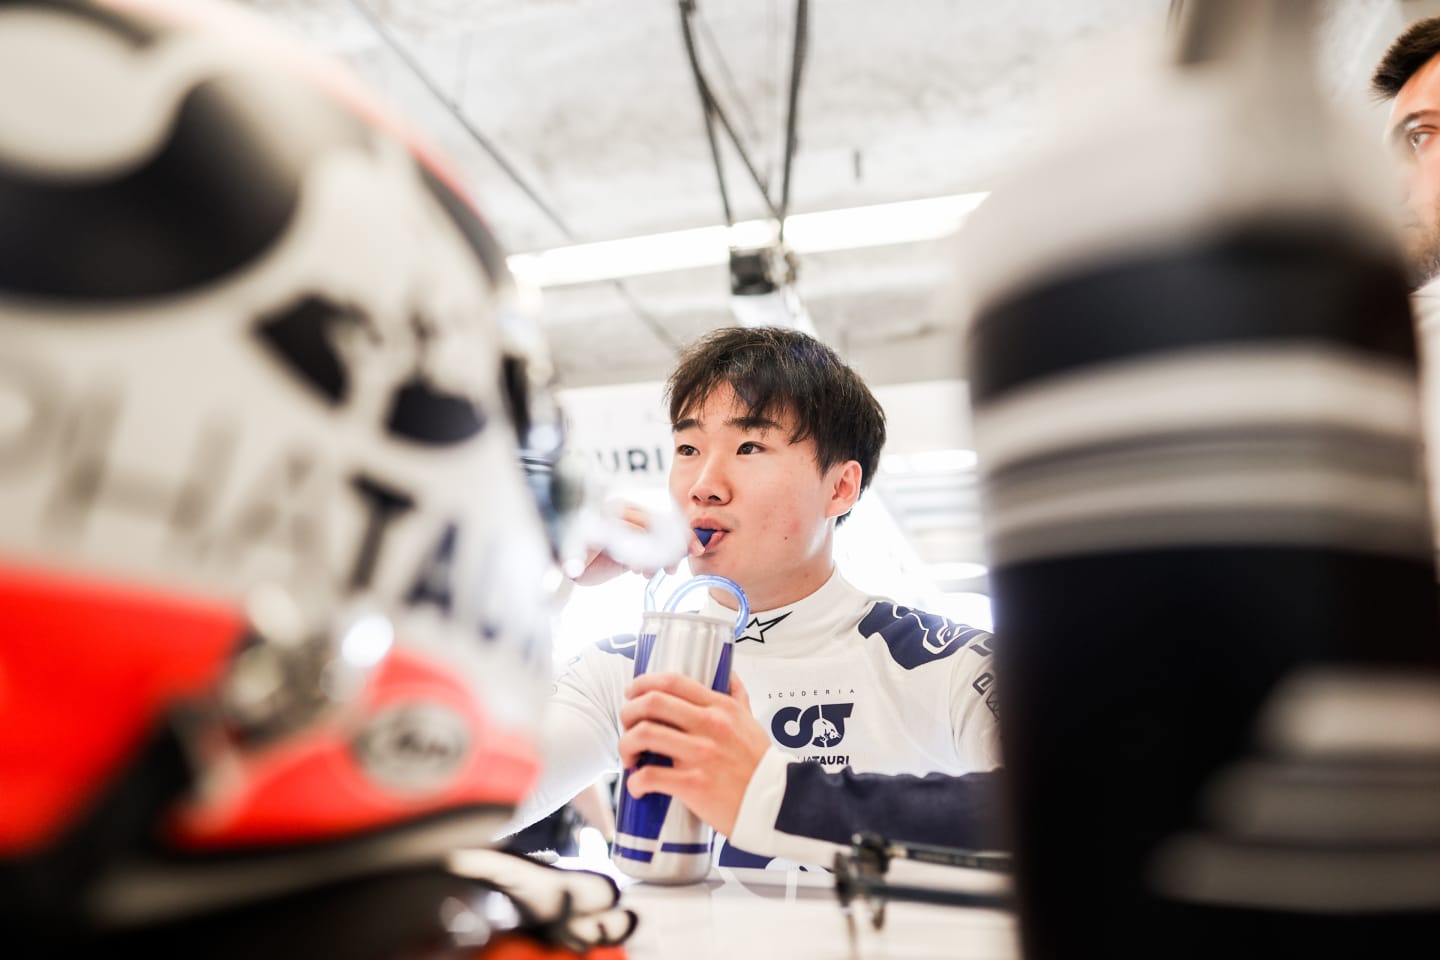 AUSTIN, TEXAS - OCTOBER 21: Yuki Tsunoda of Scuderia AlphaTauri and Japan  during practice ahead of the F1 Grand Prix of USA at Circuit of The Americas on October 21, 2022 in Austin, Texas. (Photo by Peter Fox/Getty Images)